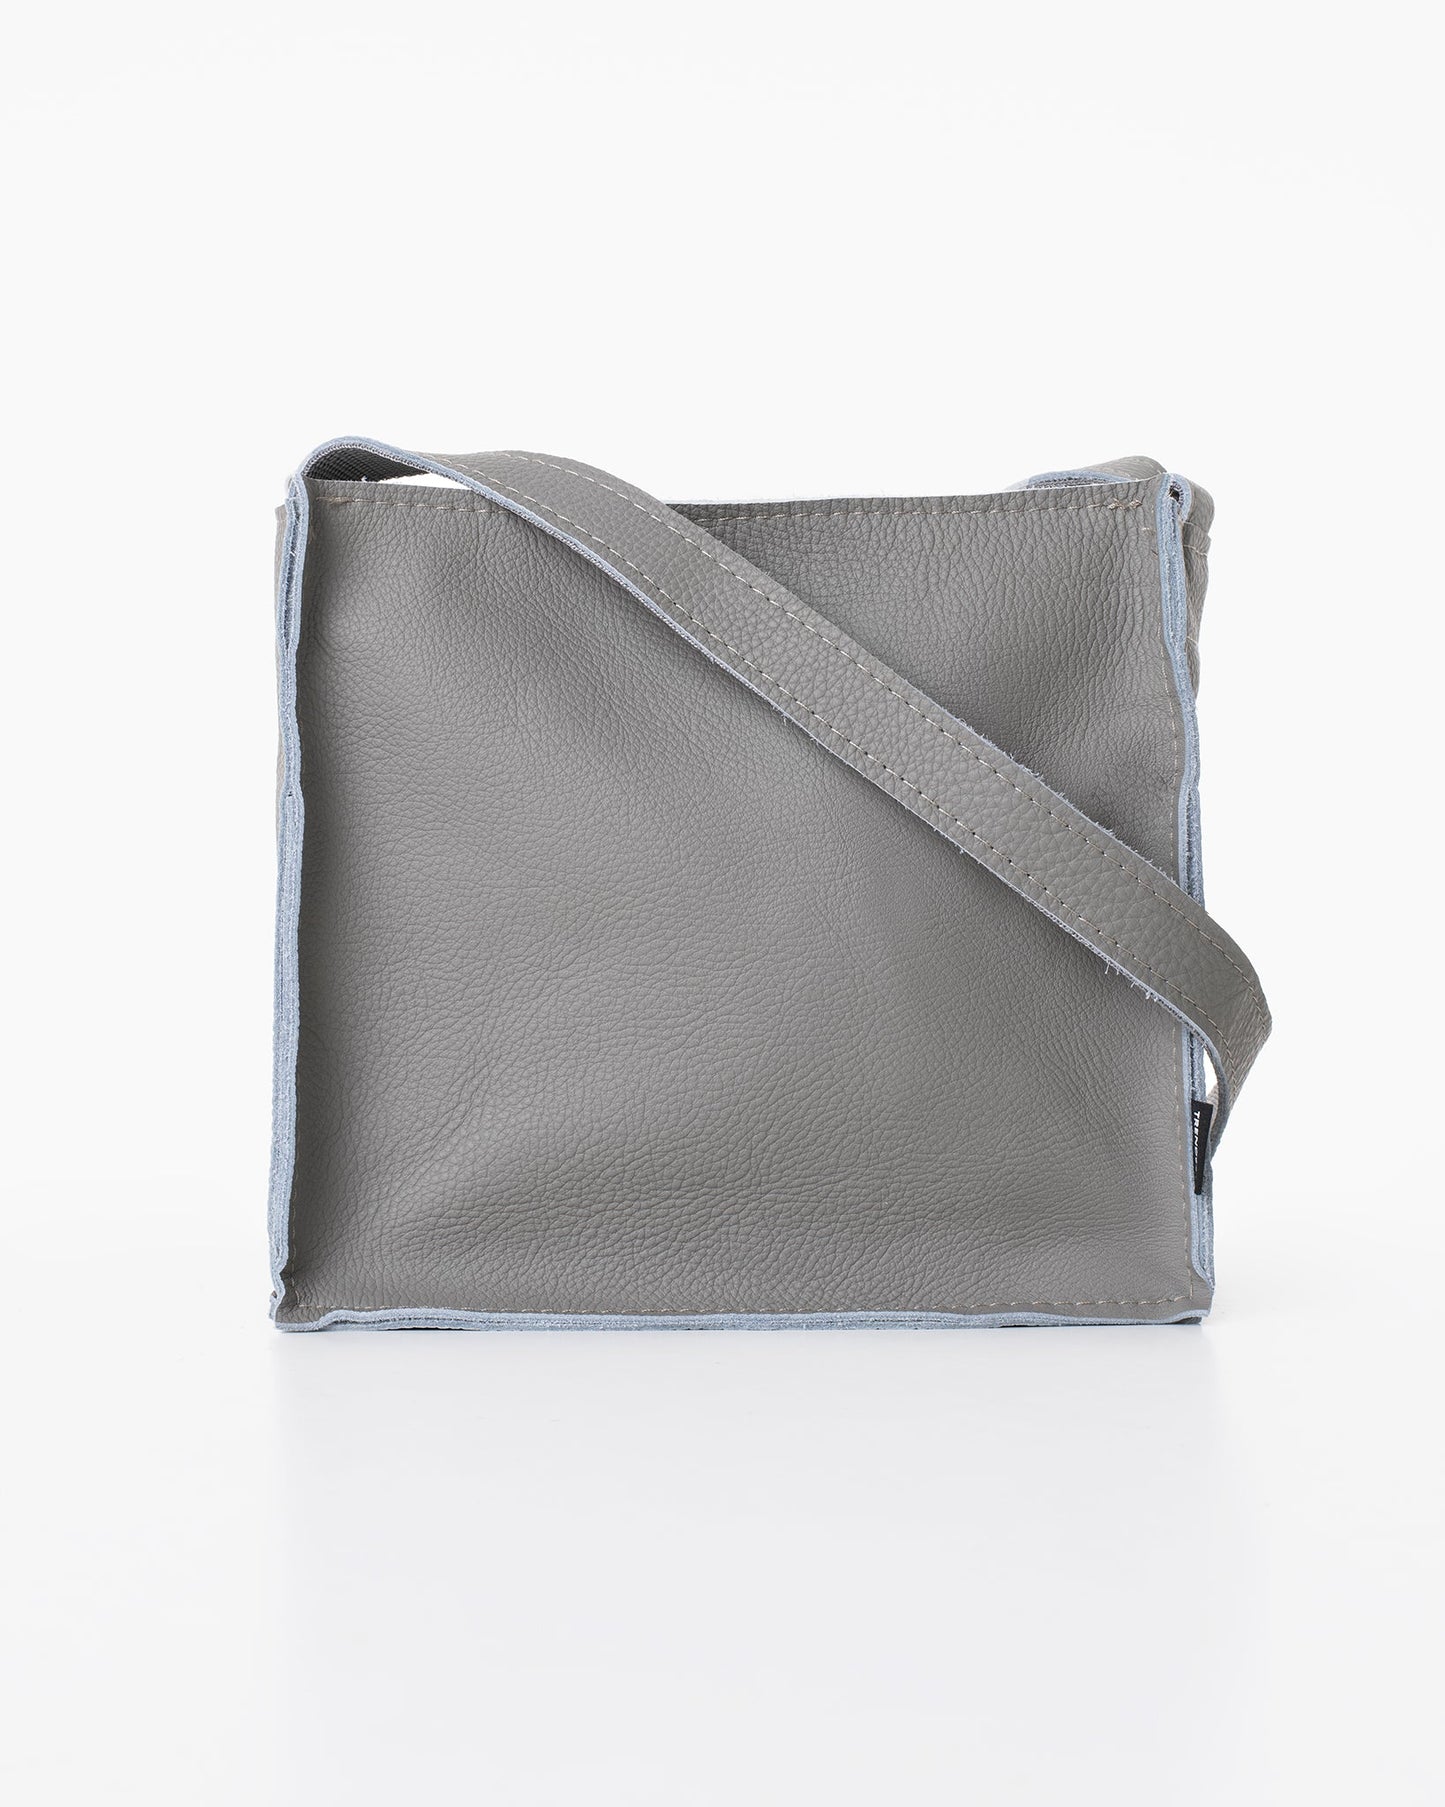 Handmade Folk 1 shoulder bag in light grey leather, crafted from furniture industry leftovers in Estonia. Unique design, eco-friendly, and durable.